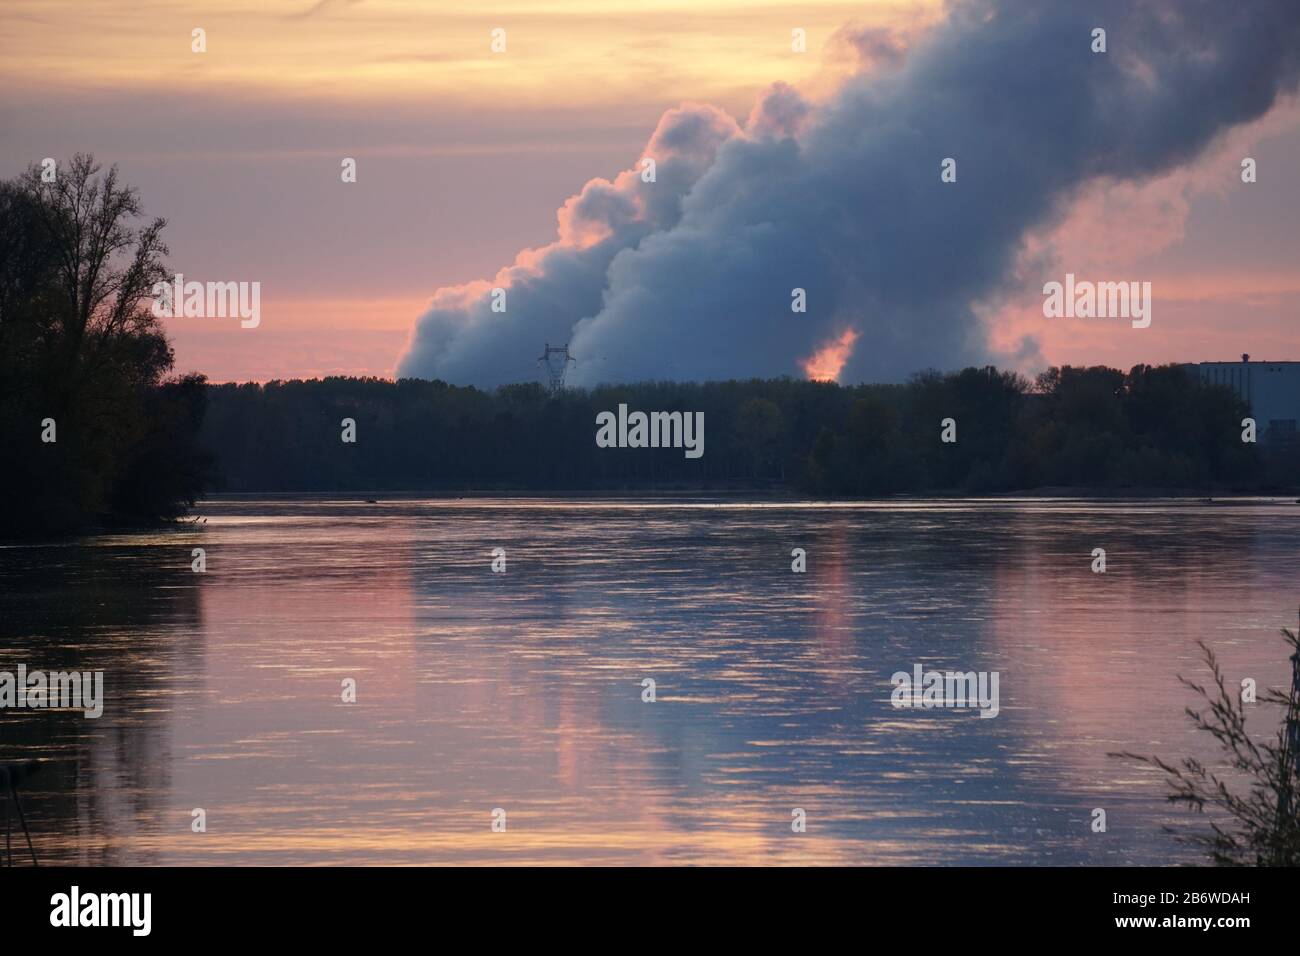 sunset on the rising steam from the nuclear power plant on the river Loire, France with reflection in the water Stock Photo